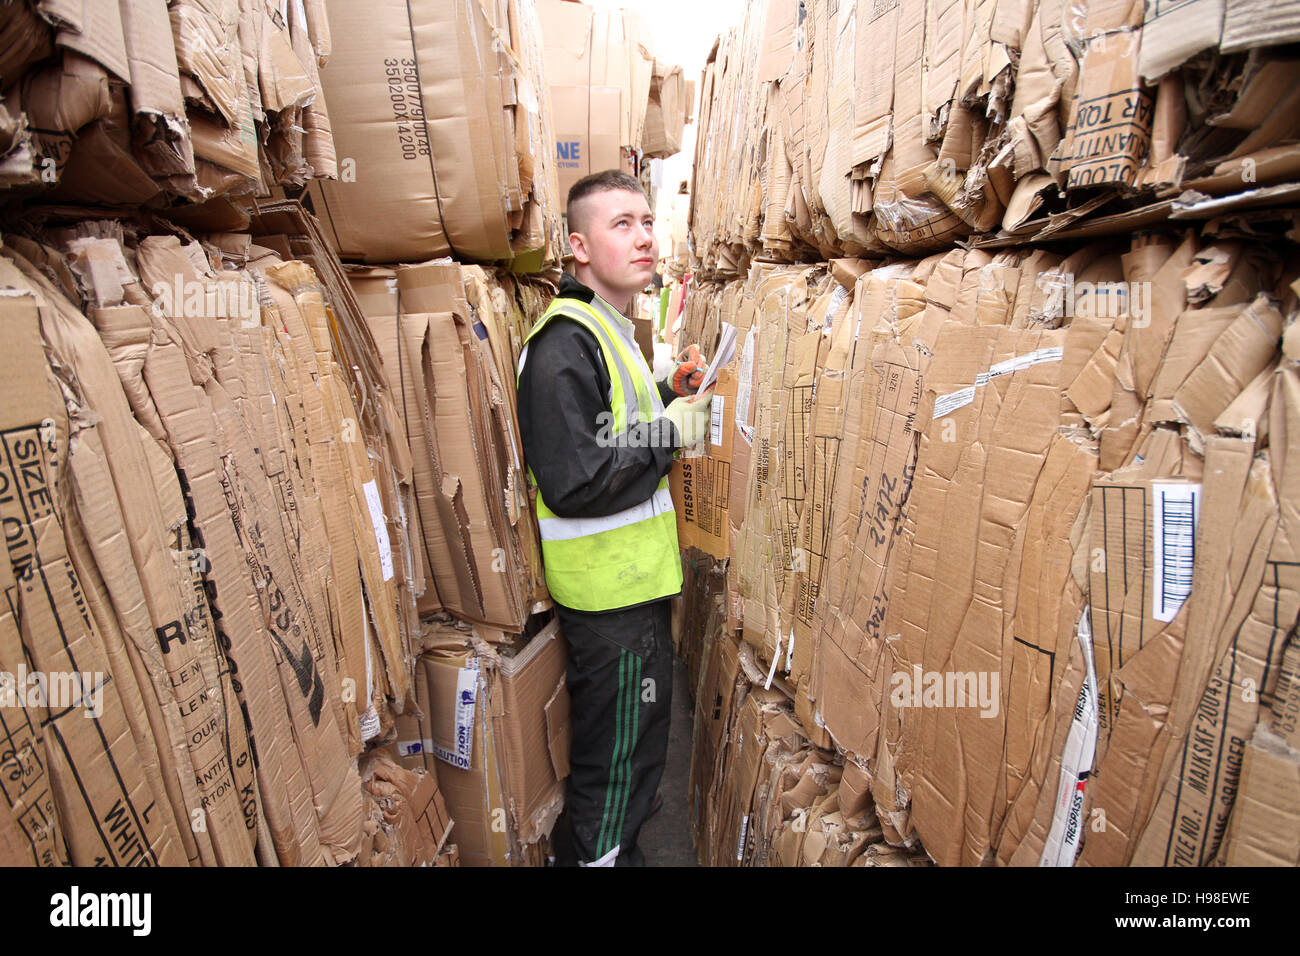 Recycling paper and doors Stock Photo